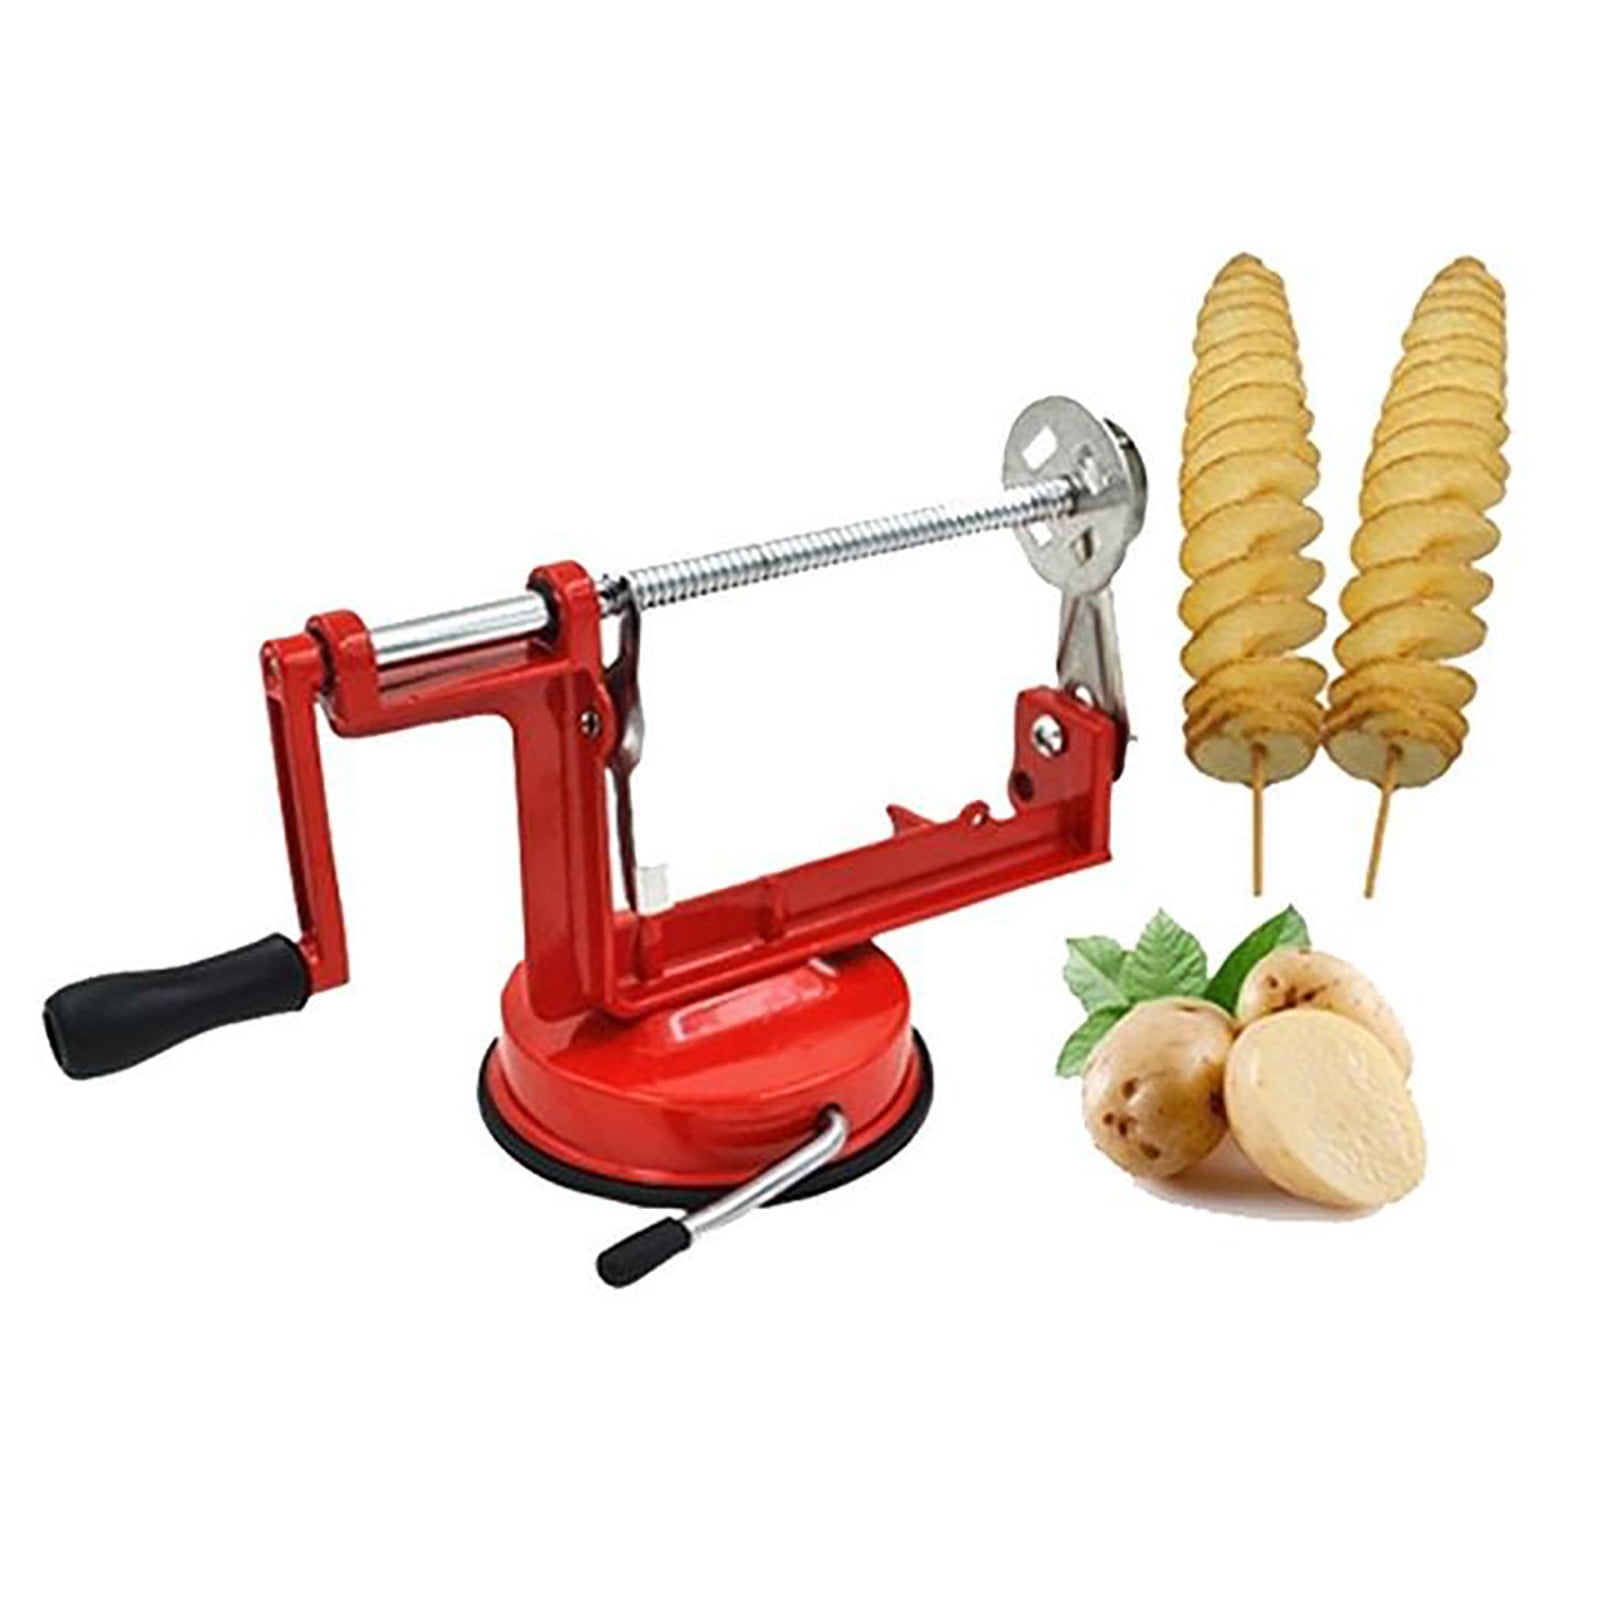 Twisted Potato Slicer, Manual Spiral Vegetable Slicer, French Fry Chips Making Tool, for Onion, Carrot, Cucumber, Eggplant, Sausage, Hot Dog, BBQ